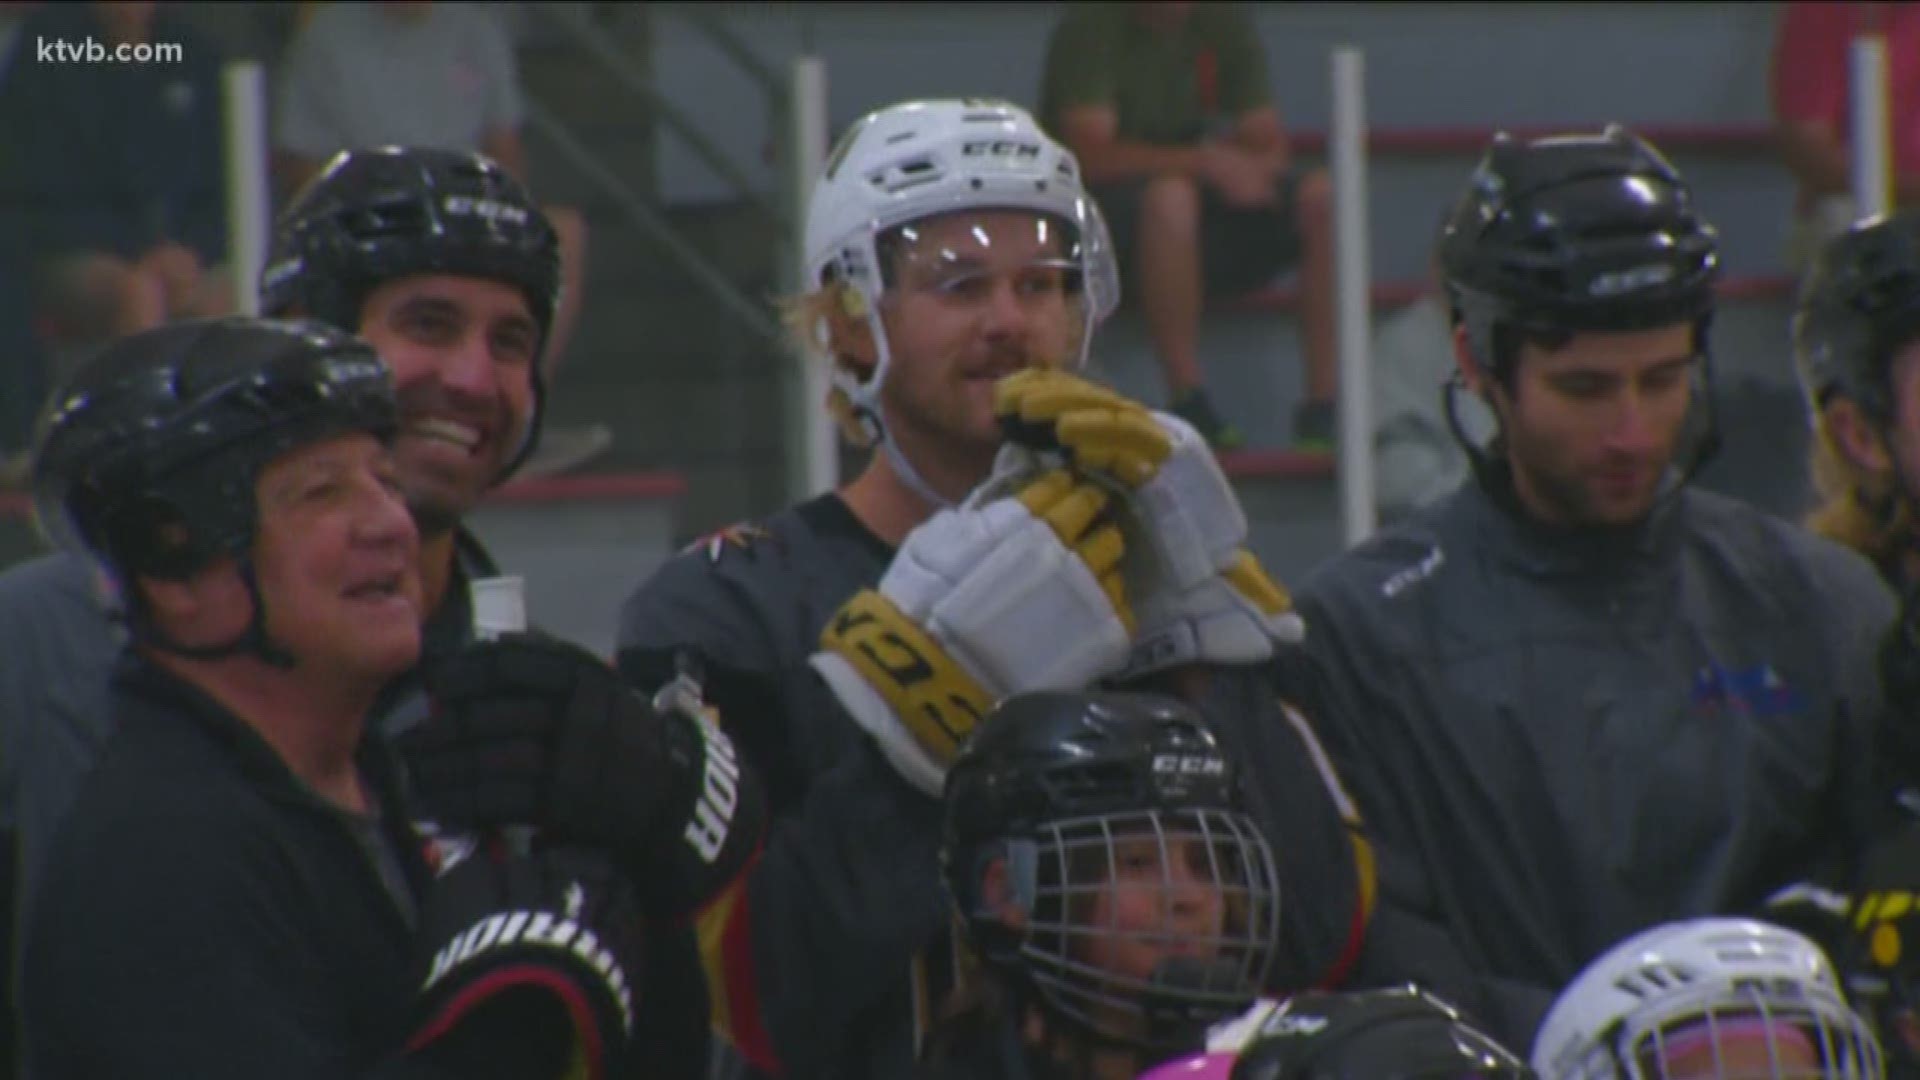 Members of the Vegas Golden Knights visited Idaho Ice World Tuesday.